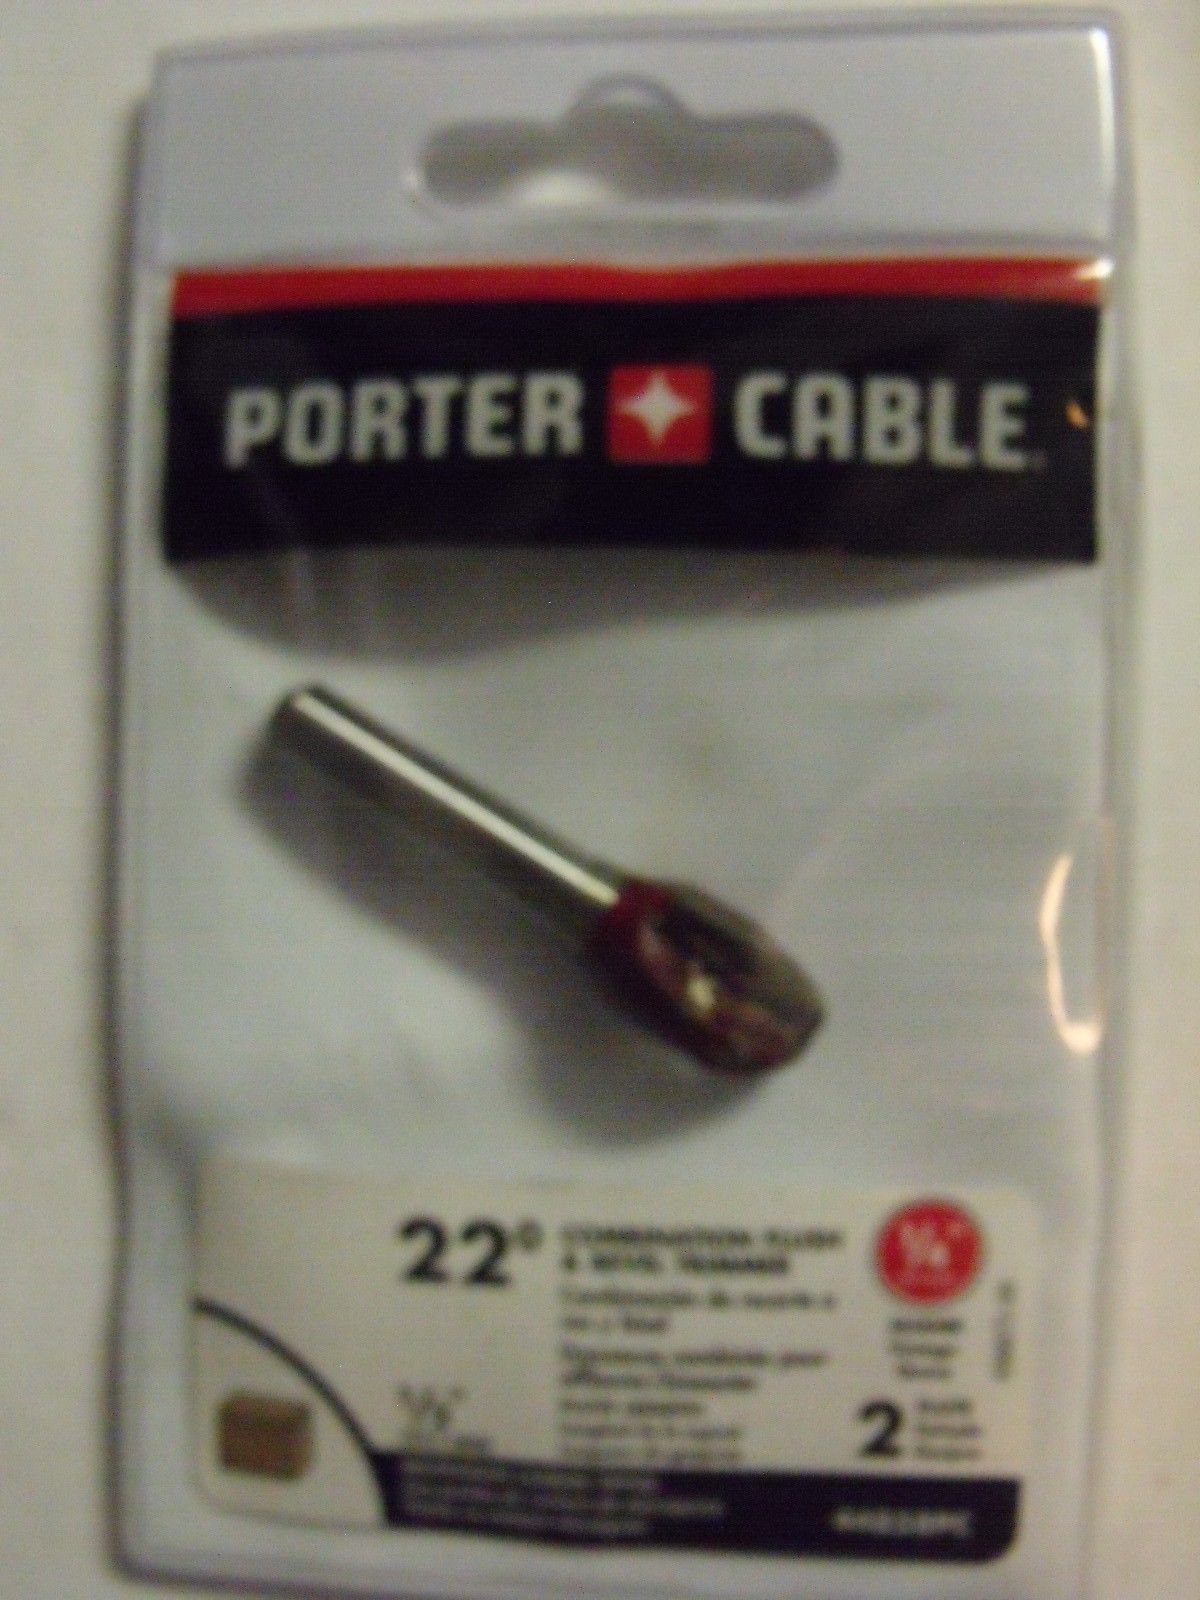 Porter Cable 44858PC 1/4" Combination Flush and 22° Bevel Cutting